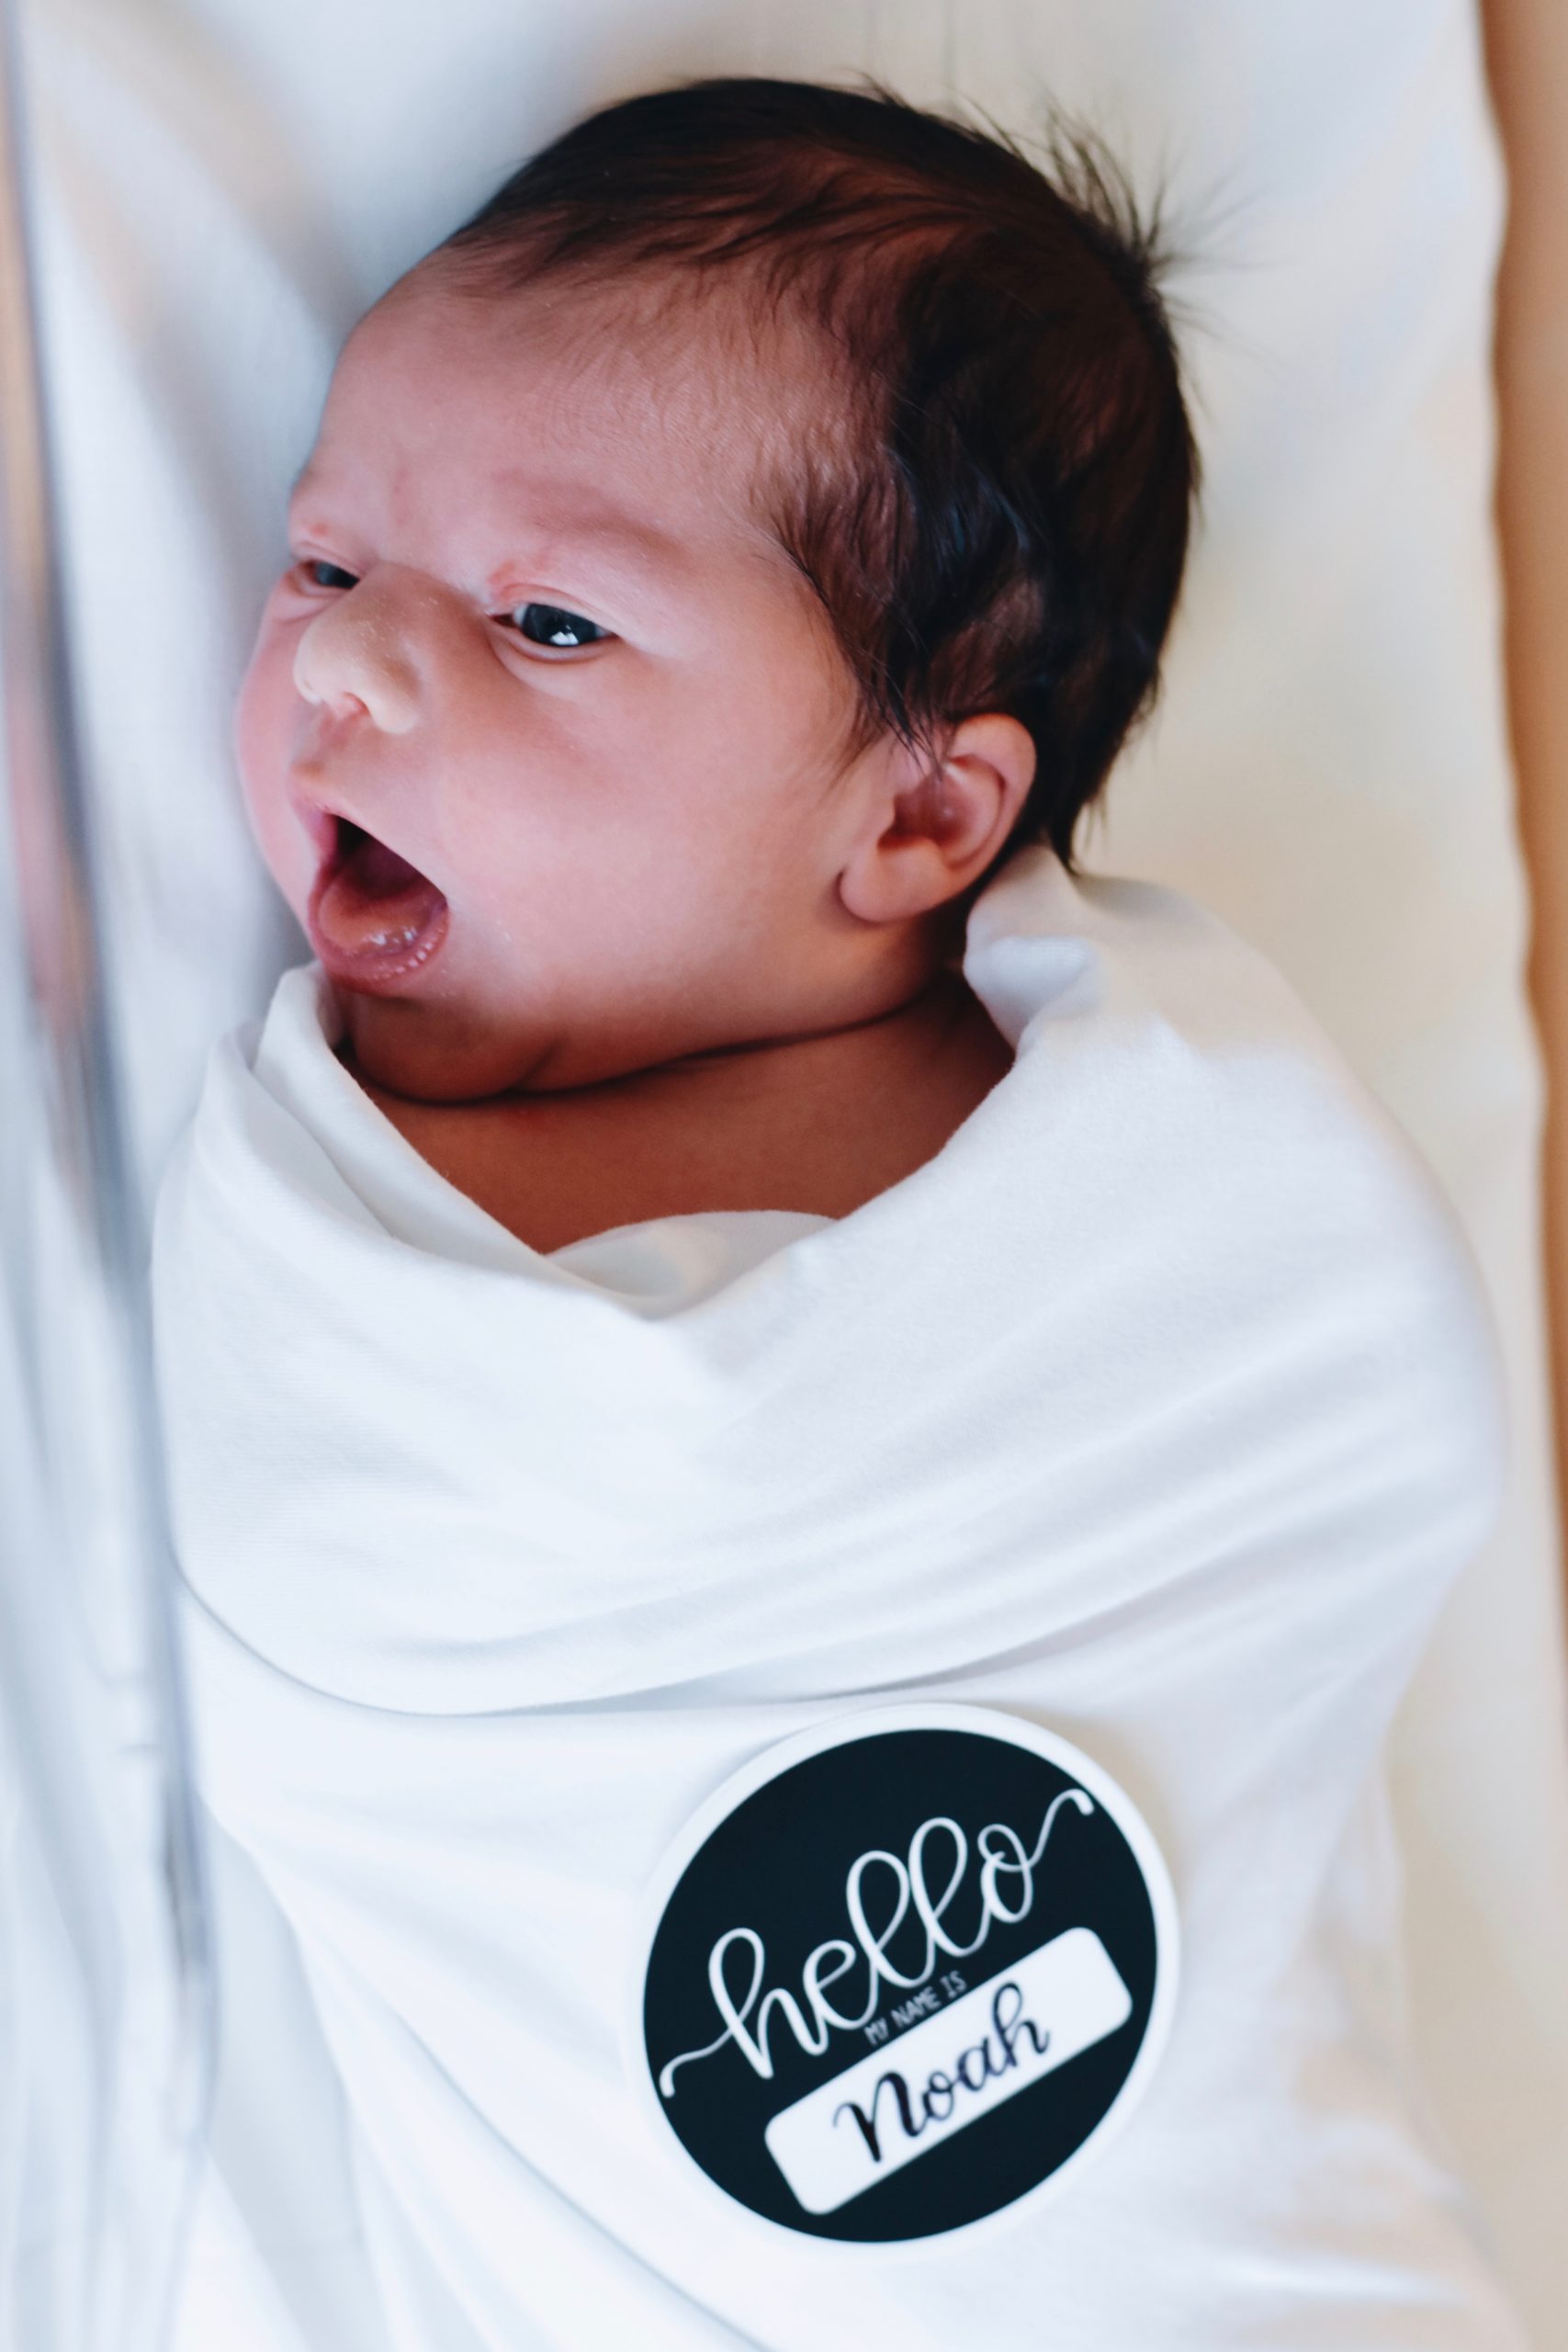 Newborn baby with name tag